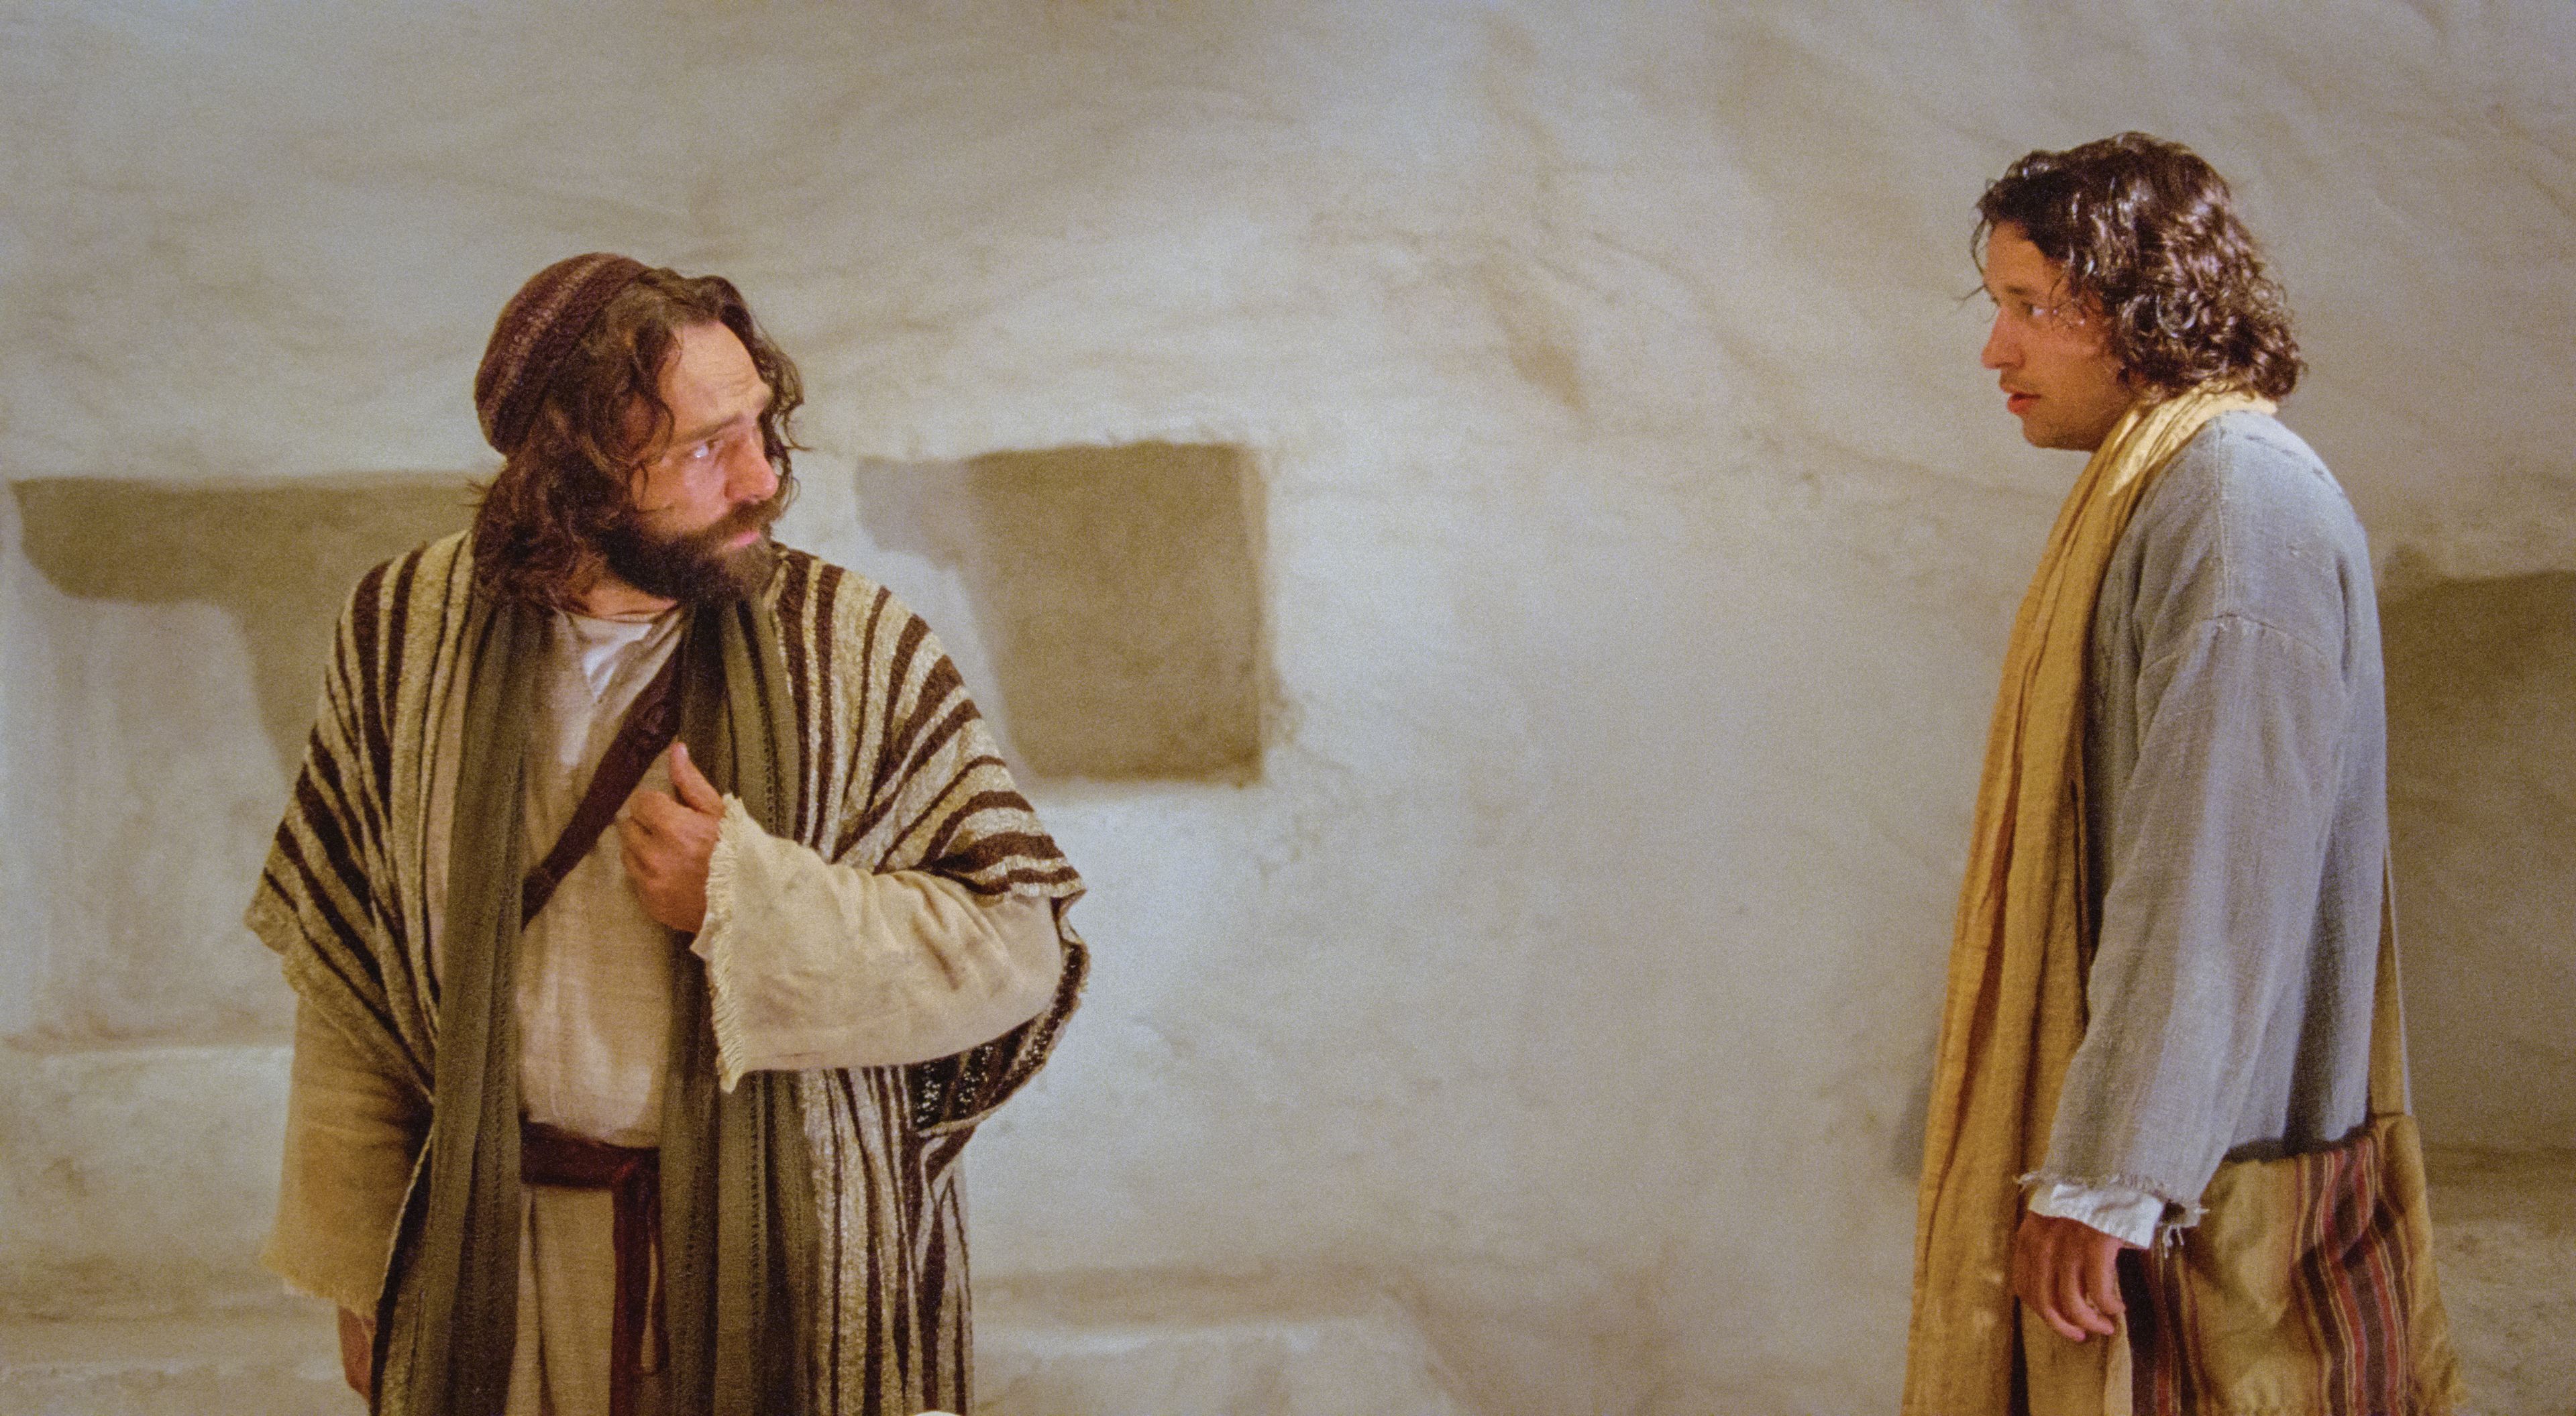 Peter and John find the empty tomb where the Savior had been.